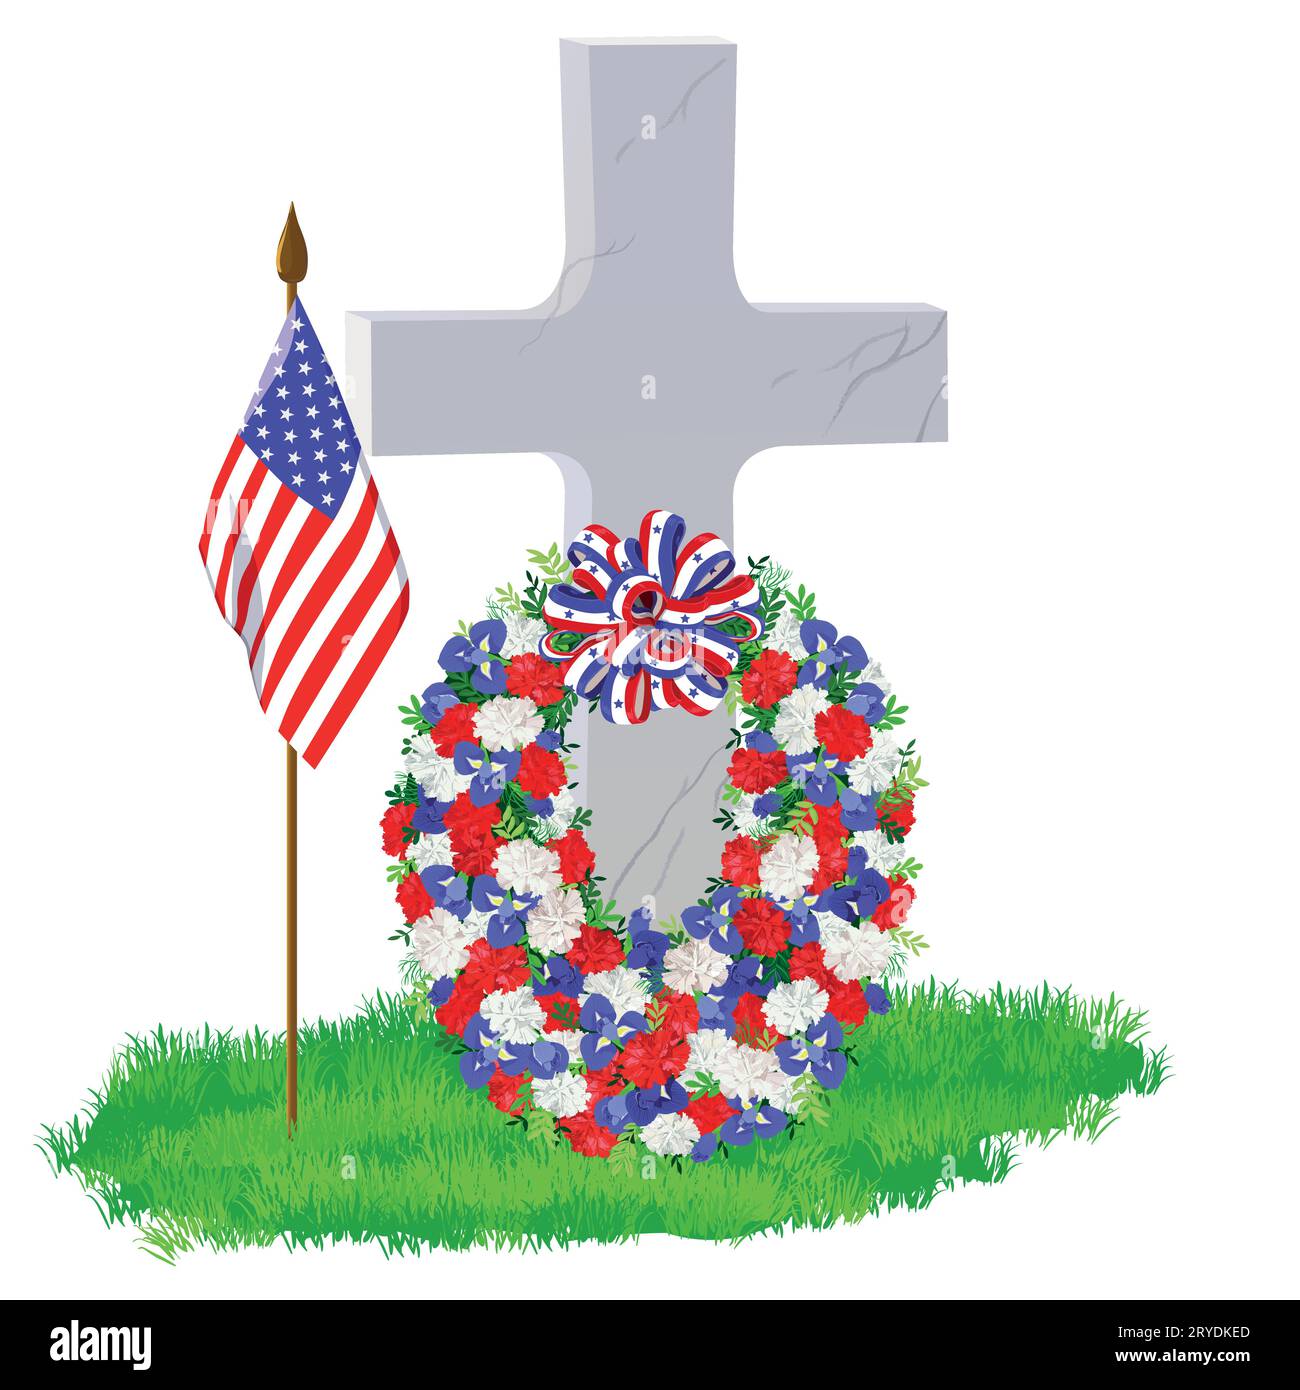 White marble tombstone in the shape of a cross on green grass. Wreath of white, blue and red flowers. On Memorial Day, an American flag adorns the gra Stock Vector